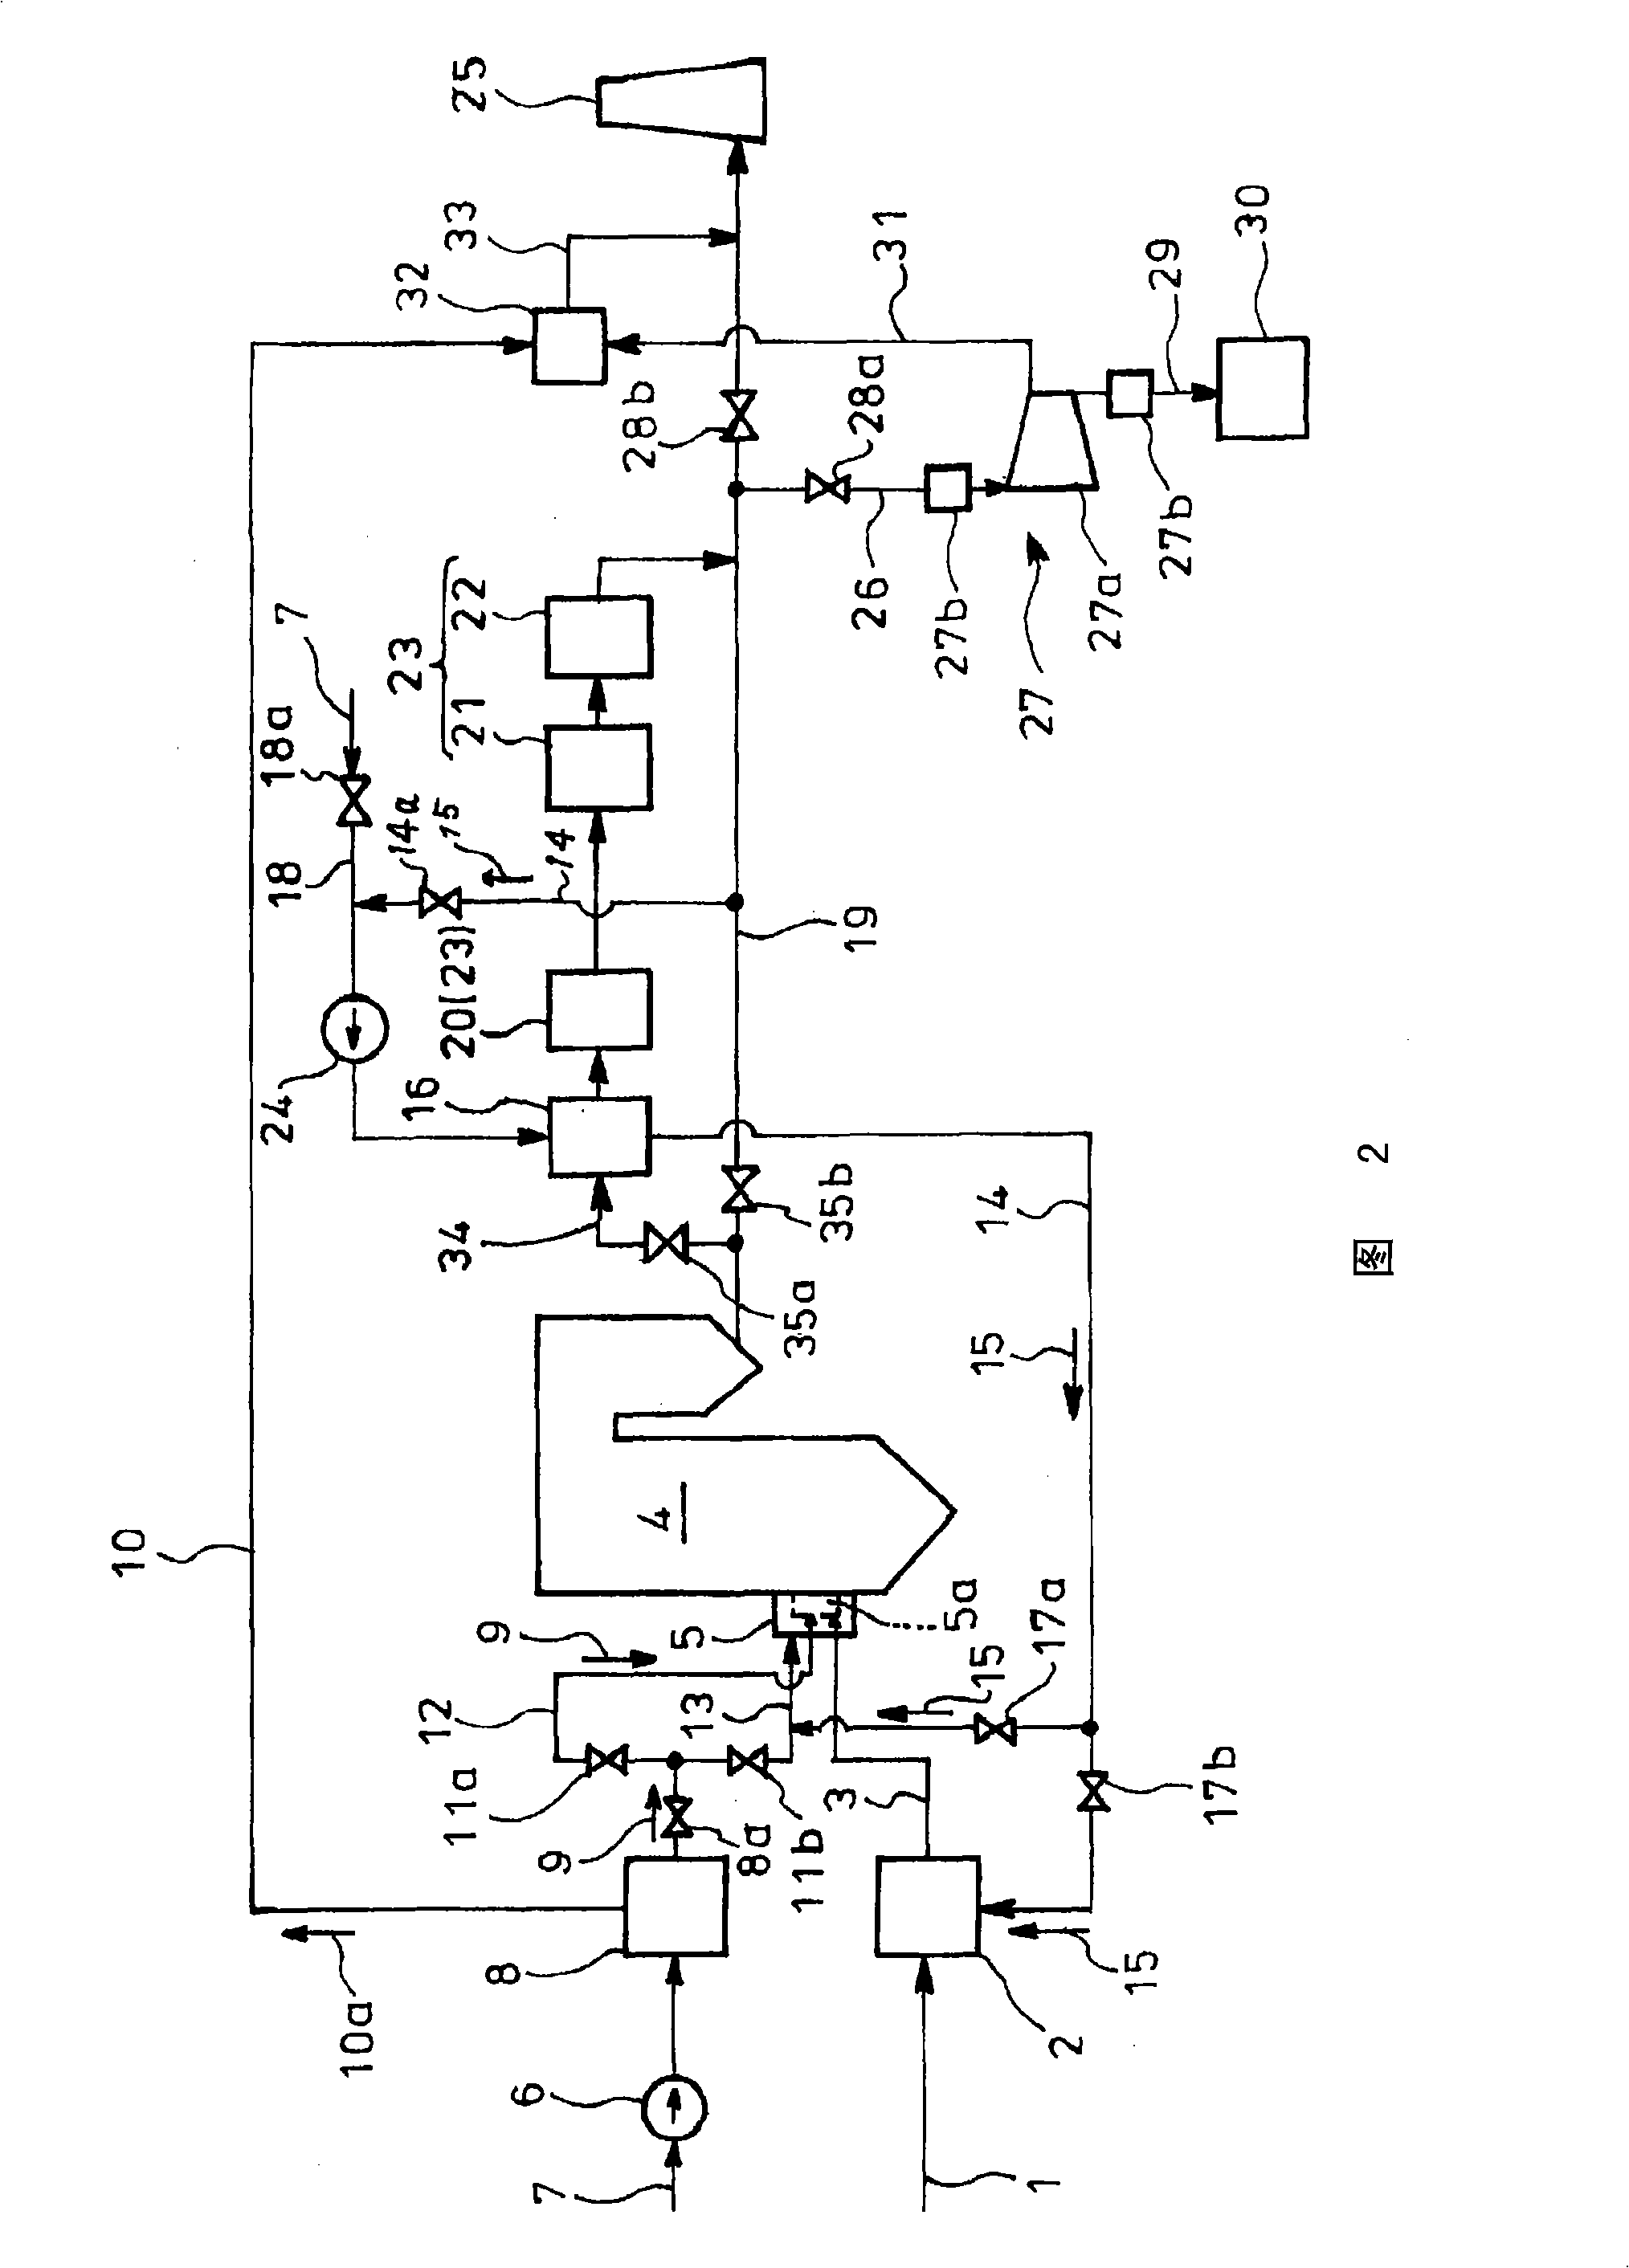 Disposal method and equipment for exhaust gas from combustion system